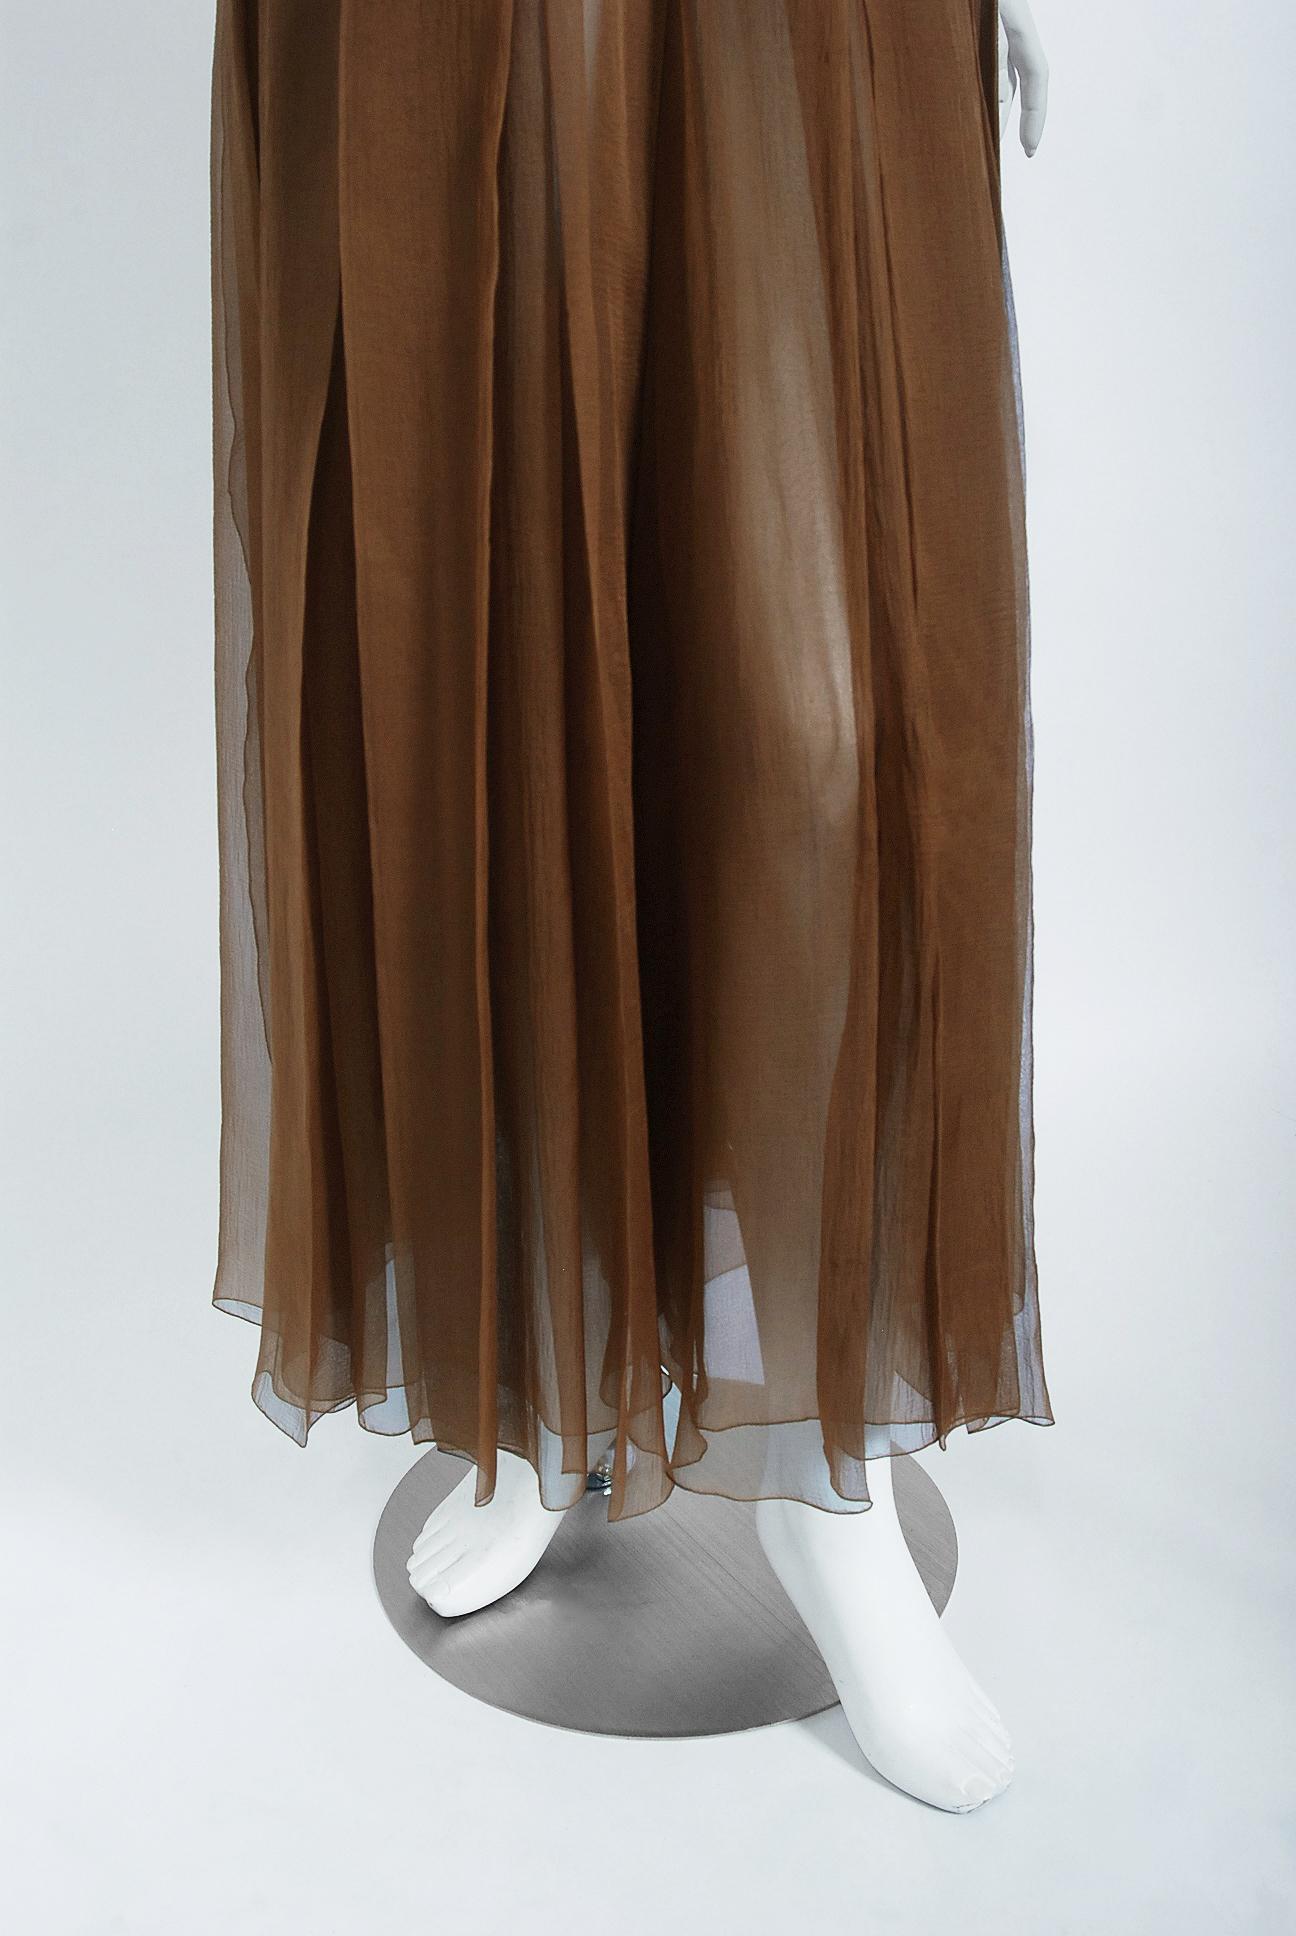 Women's Vintage 1973 Christian Dior Haute Couture Brown Strapless Blouse & Palazzo Pants